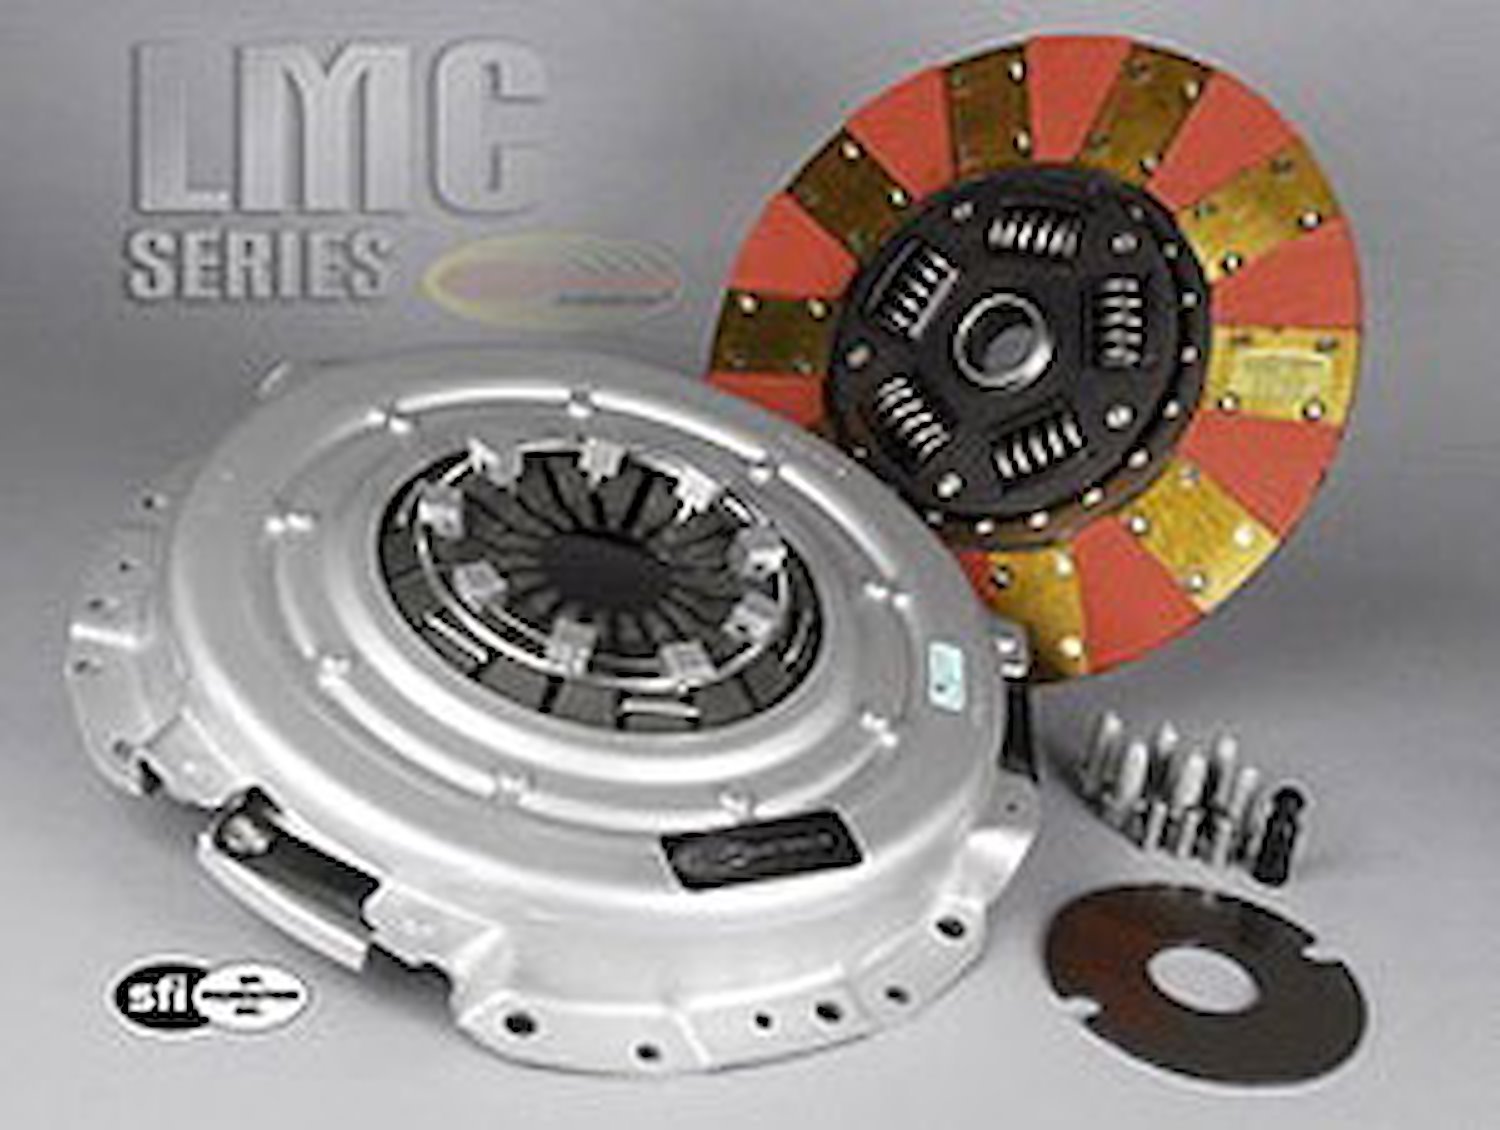 LMC Series Clutch Kit Includes Pressure Plate, Disc, Dowel Pins, Shim and Bleed Kit